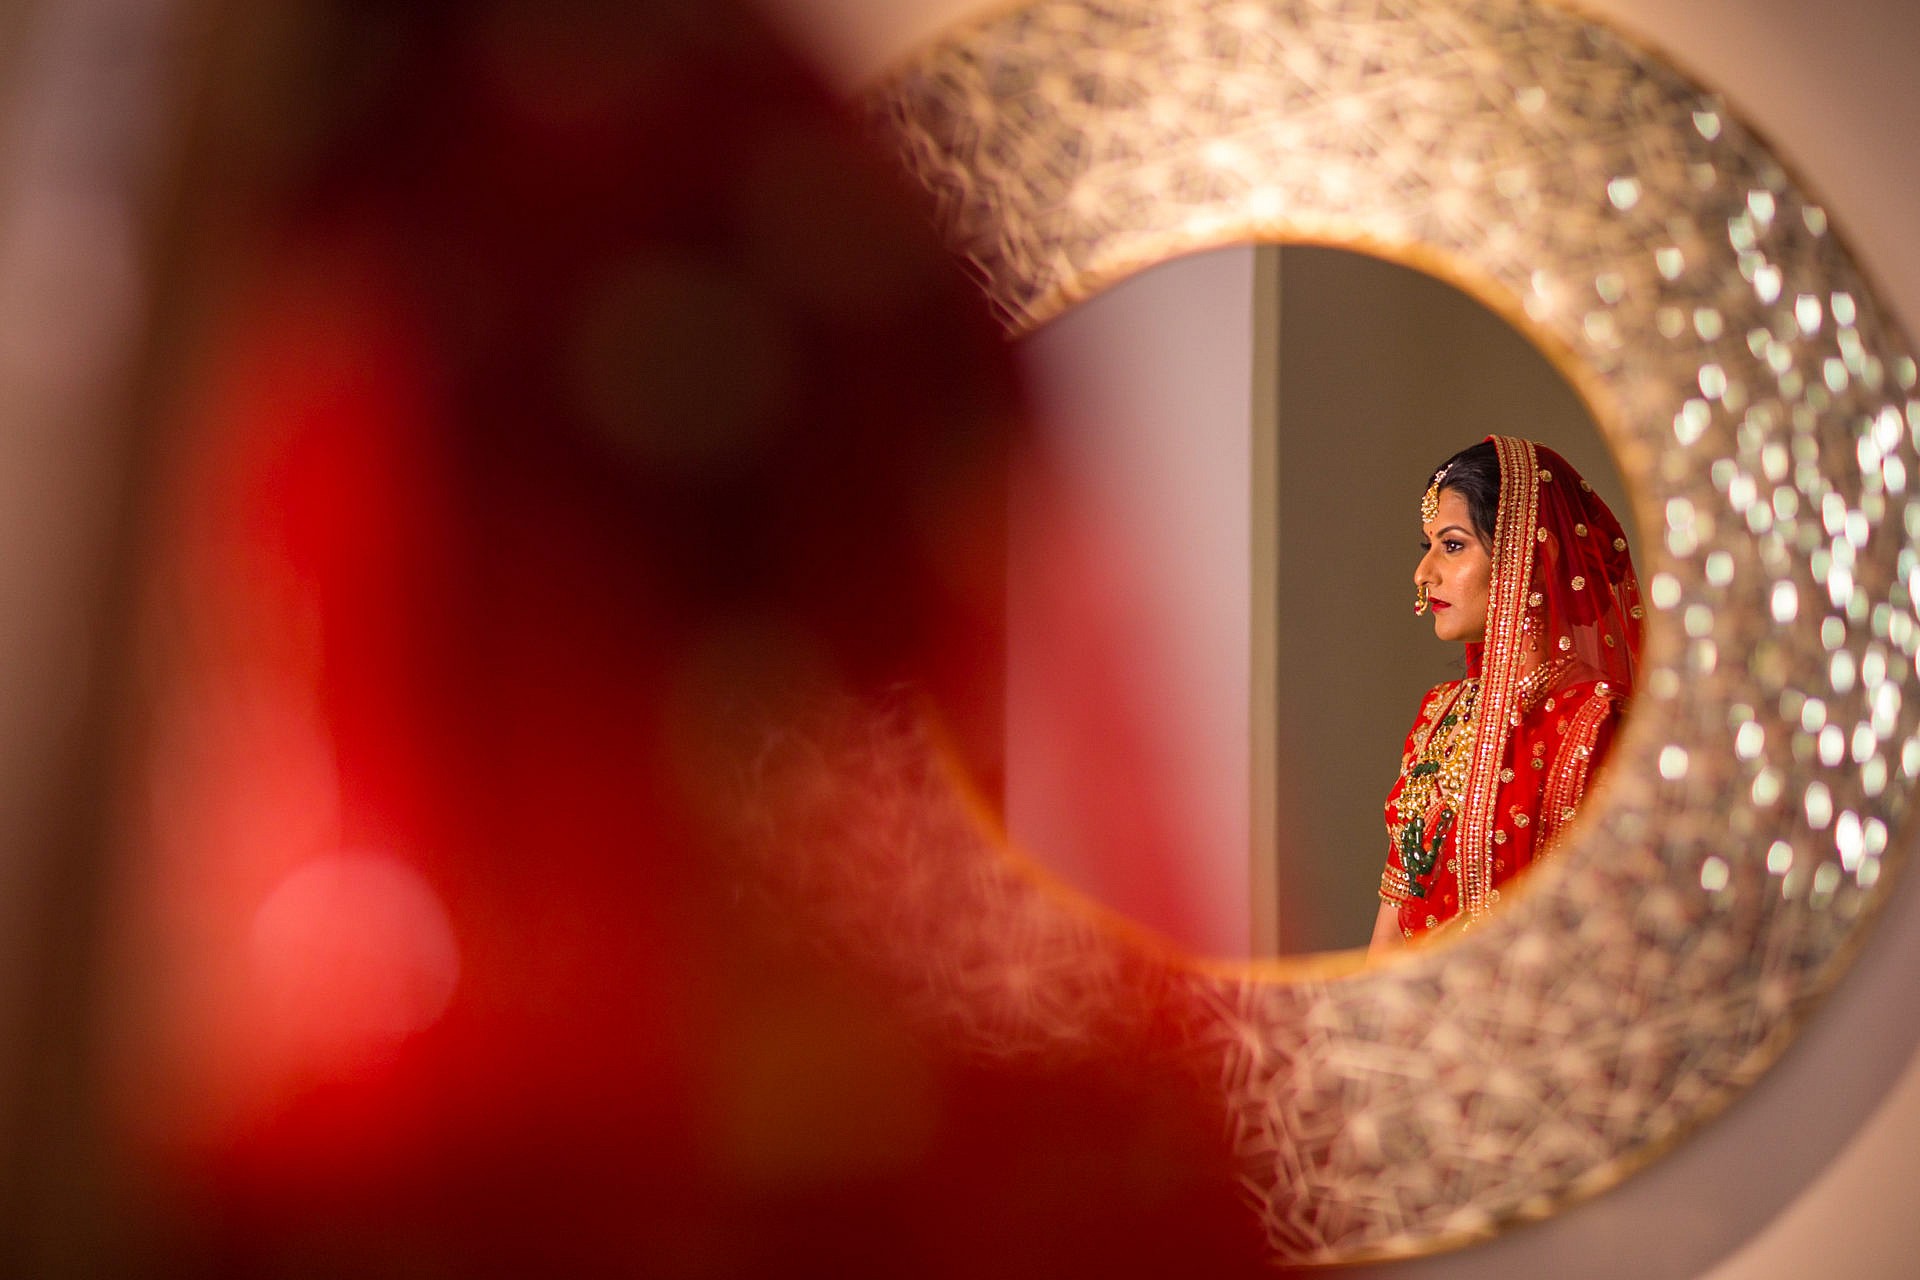 Bride's reflection in the mirror as she waits on her wedding day